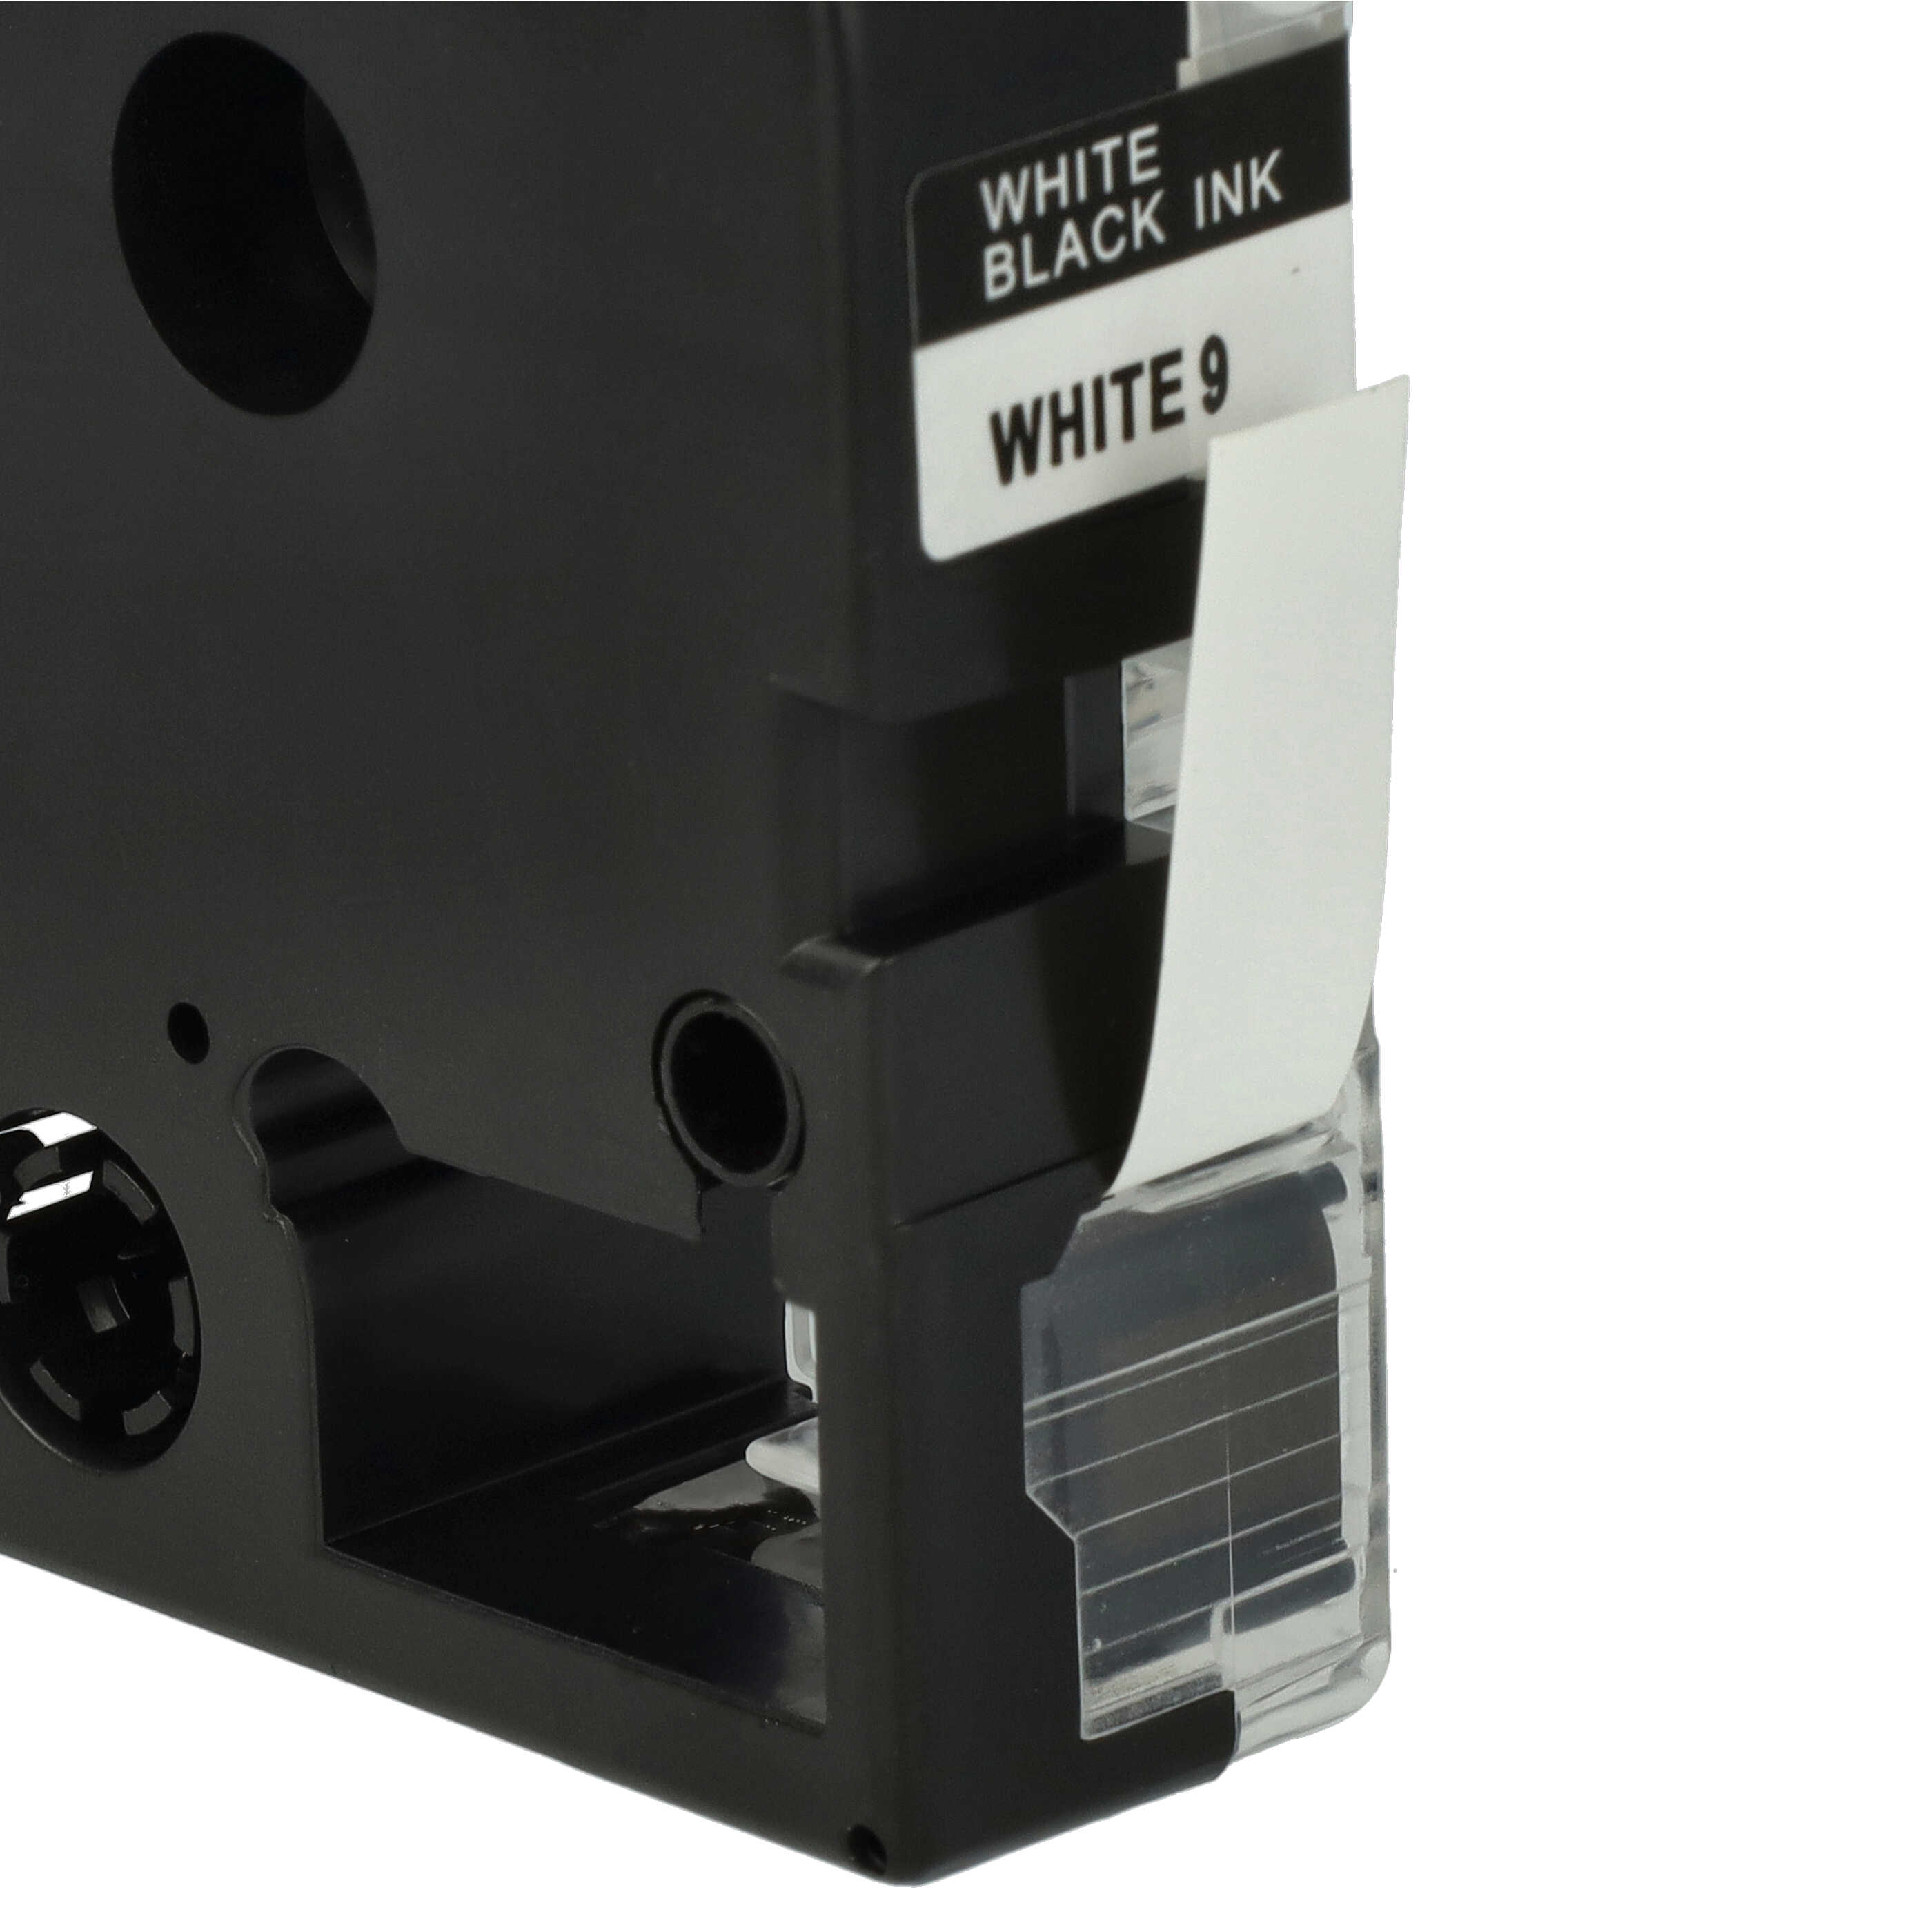 3x Label Tape as Replacement for Epson SS9KW, LC-3WBN - 9 mm Black to White